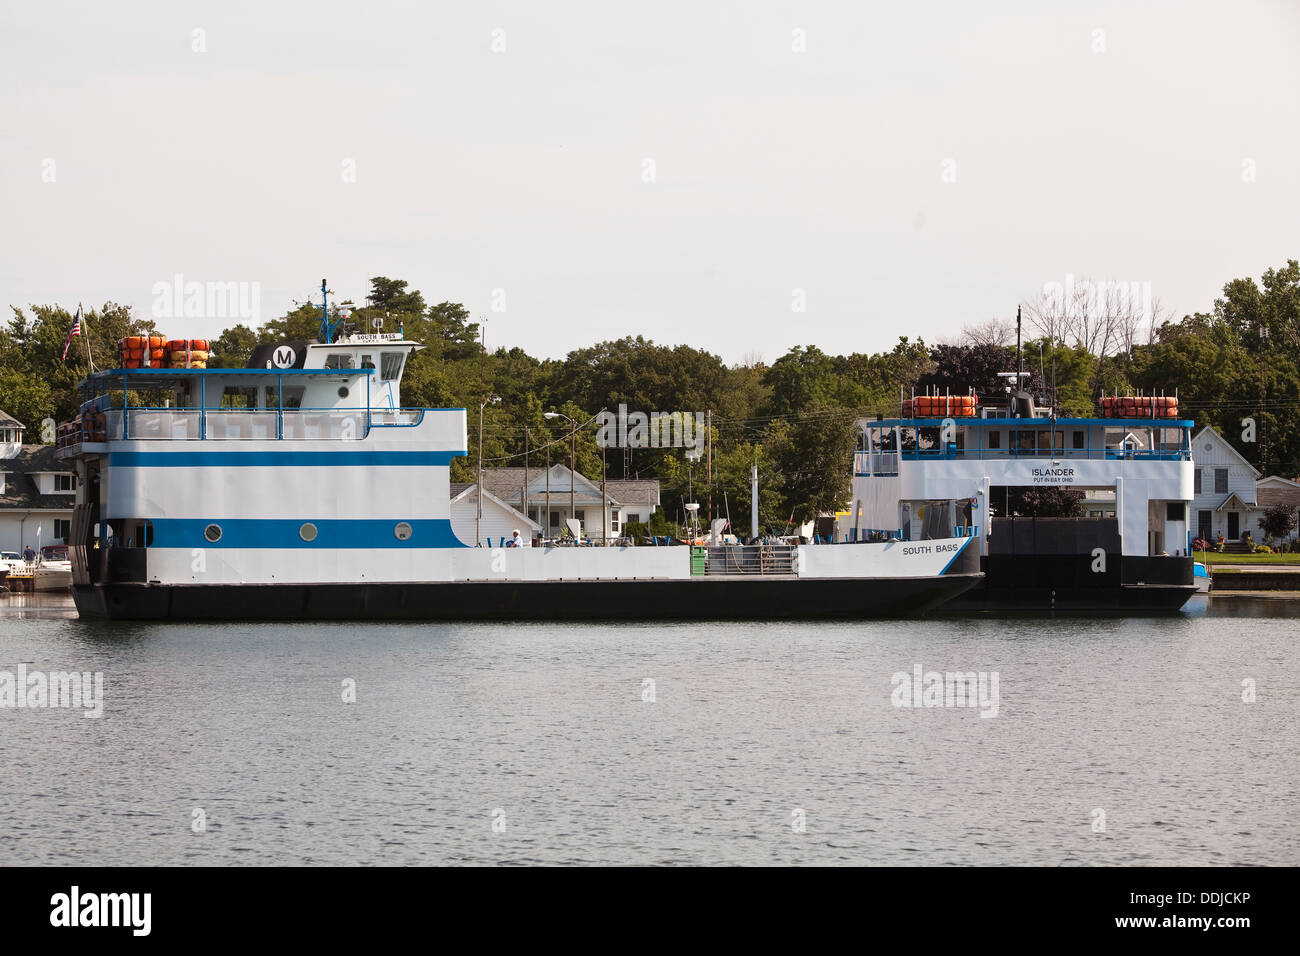 The Islander and the South Bass ferries are seen in Put-In-Bay on South Bass Island, Ohio Stock Photo